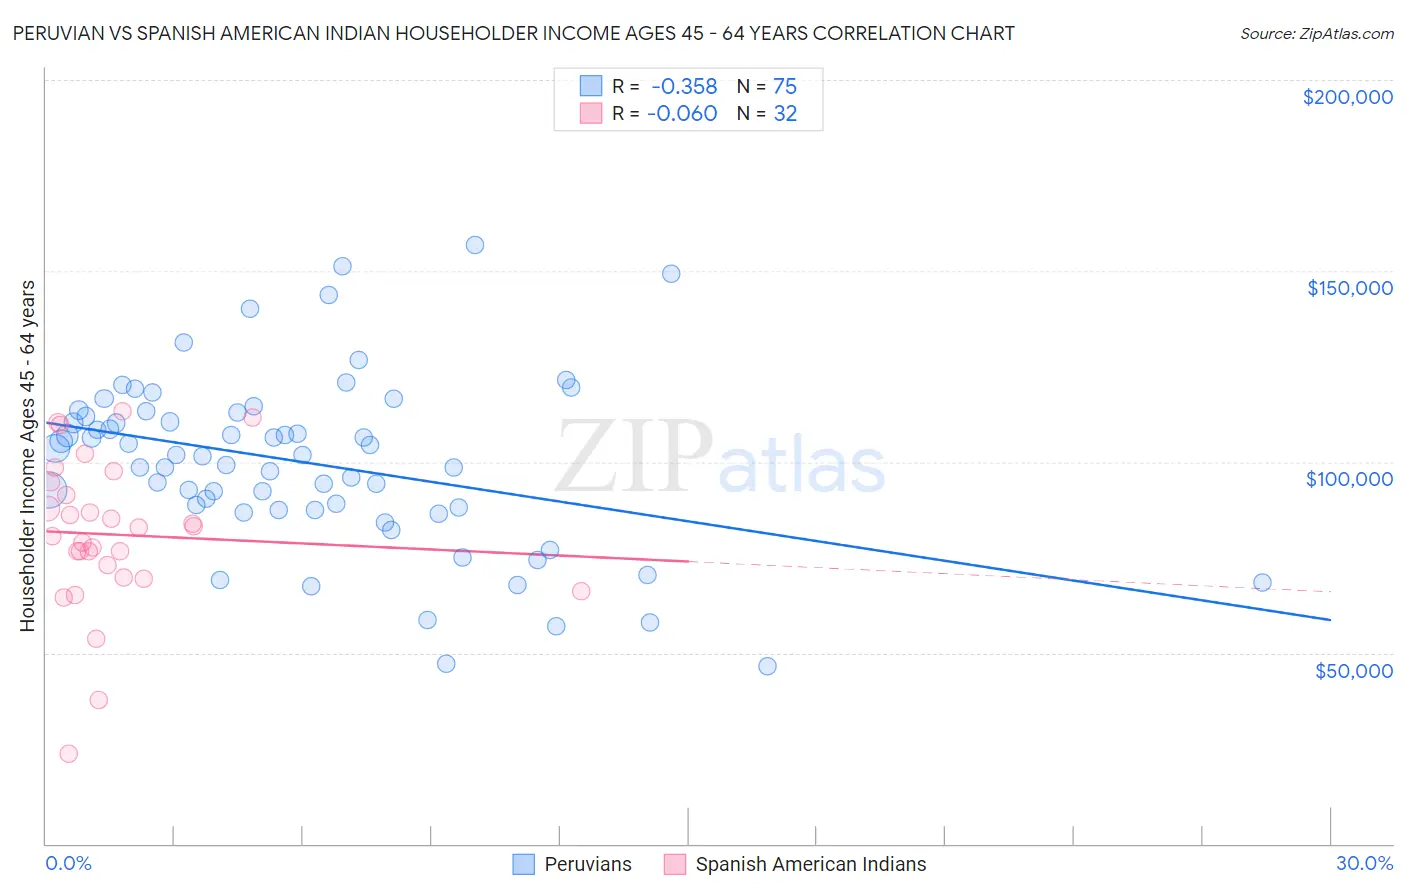 Peruvian vs Spanish American Indian Householder Income Ages 45 - 64 years